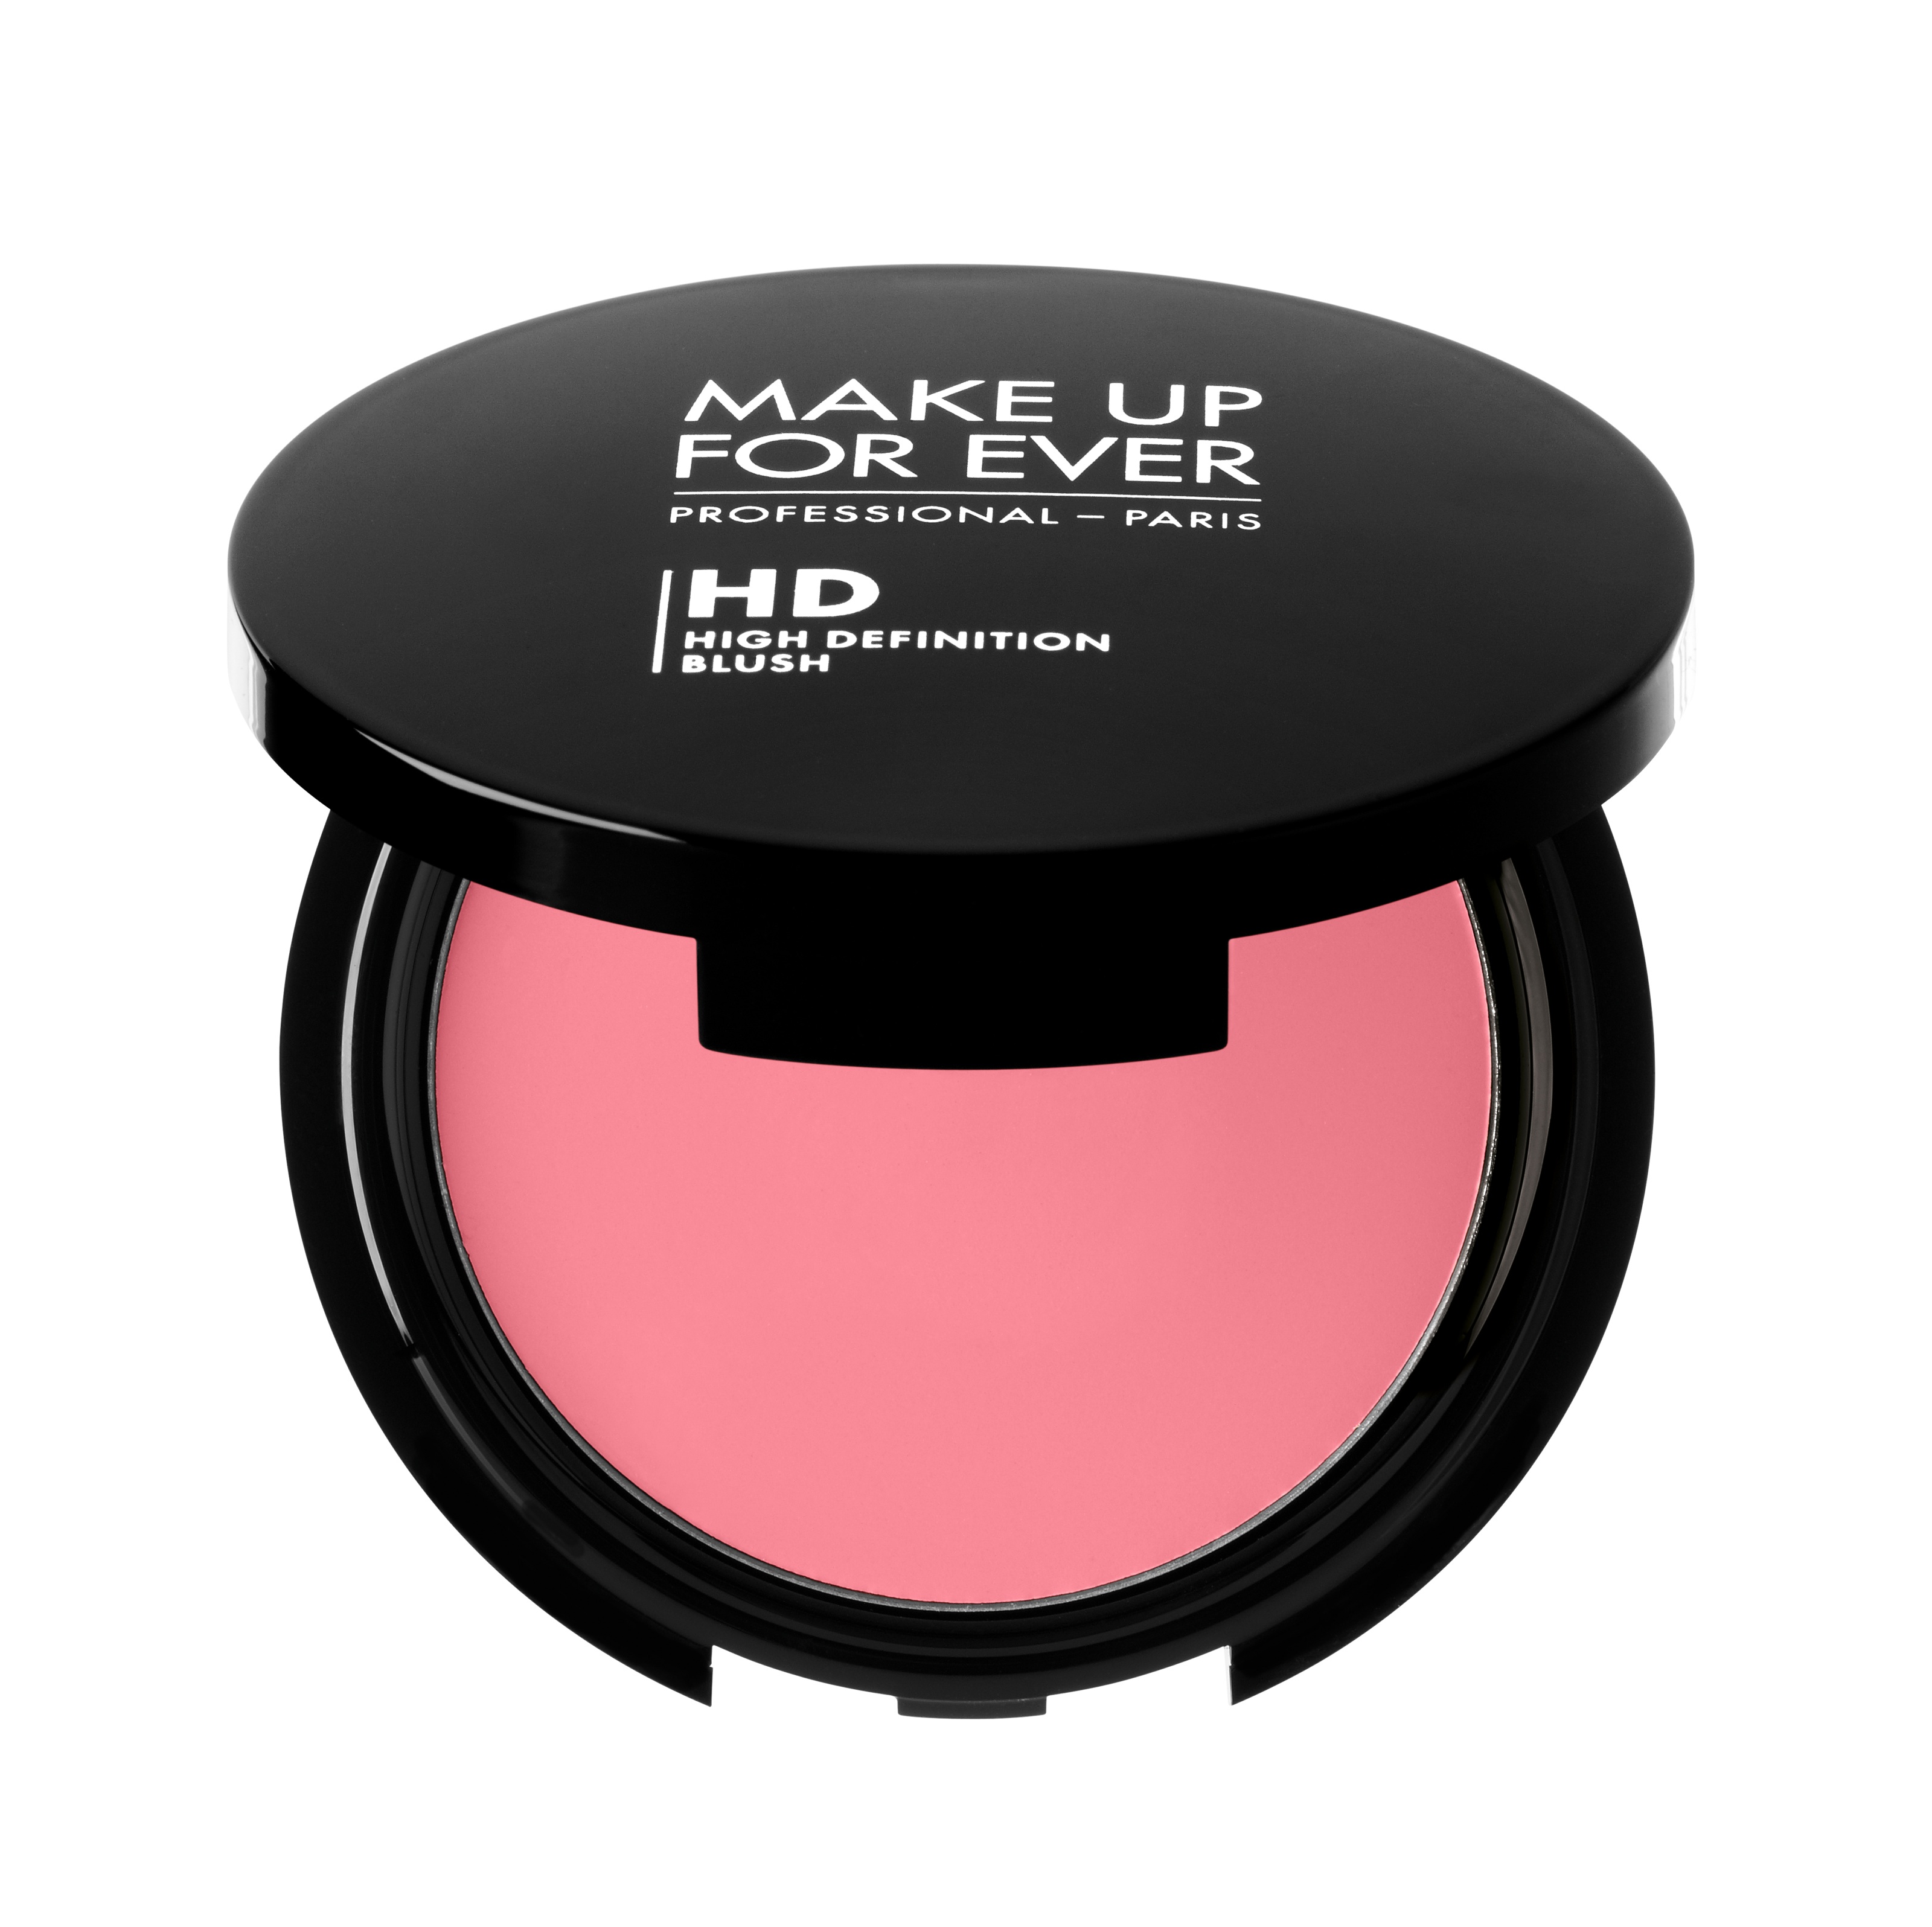 MAKE UP FOR EVER Debuts At The Makeup Show LA